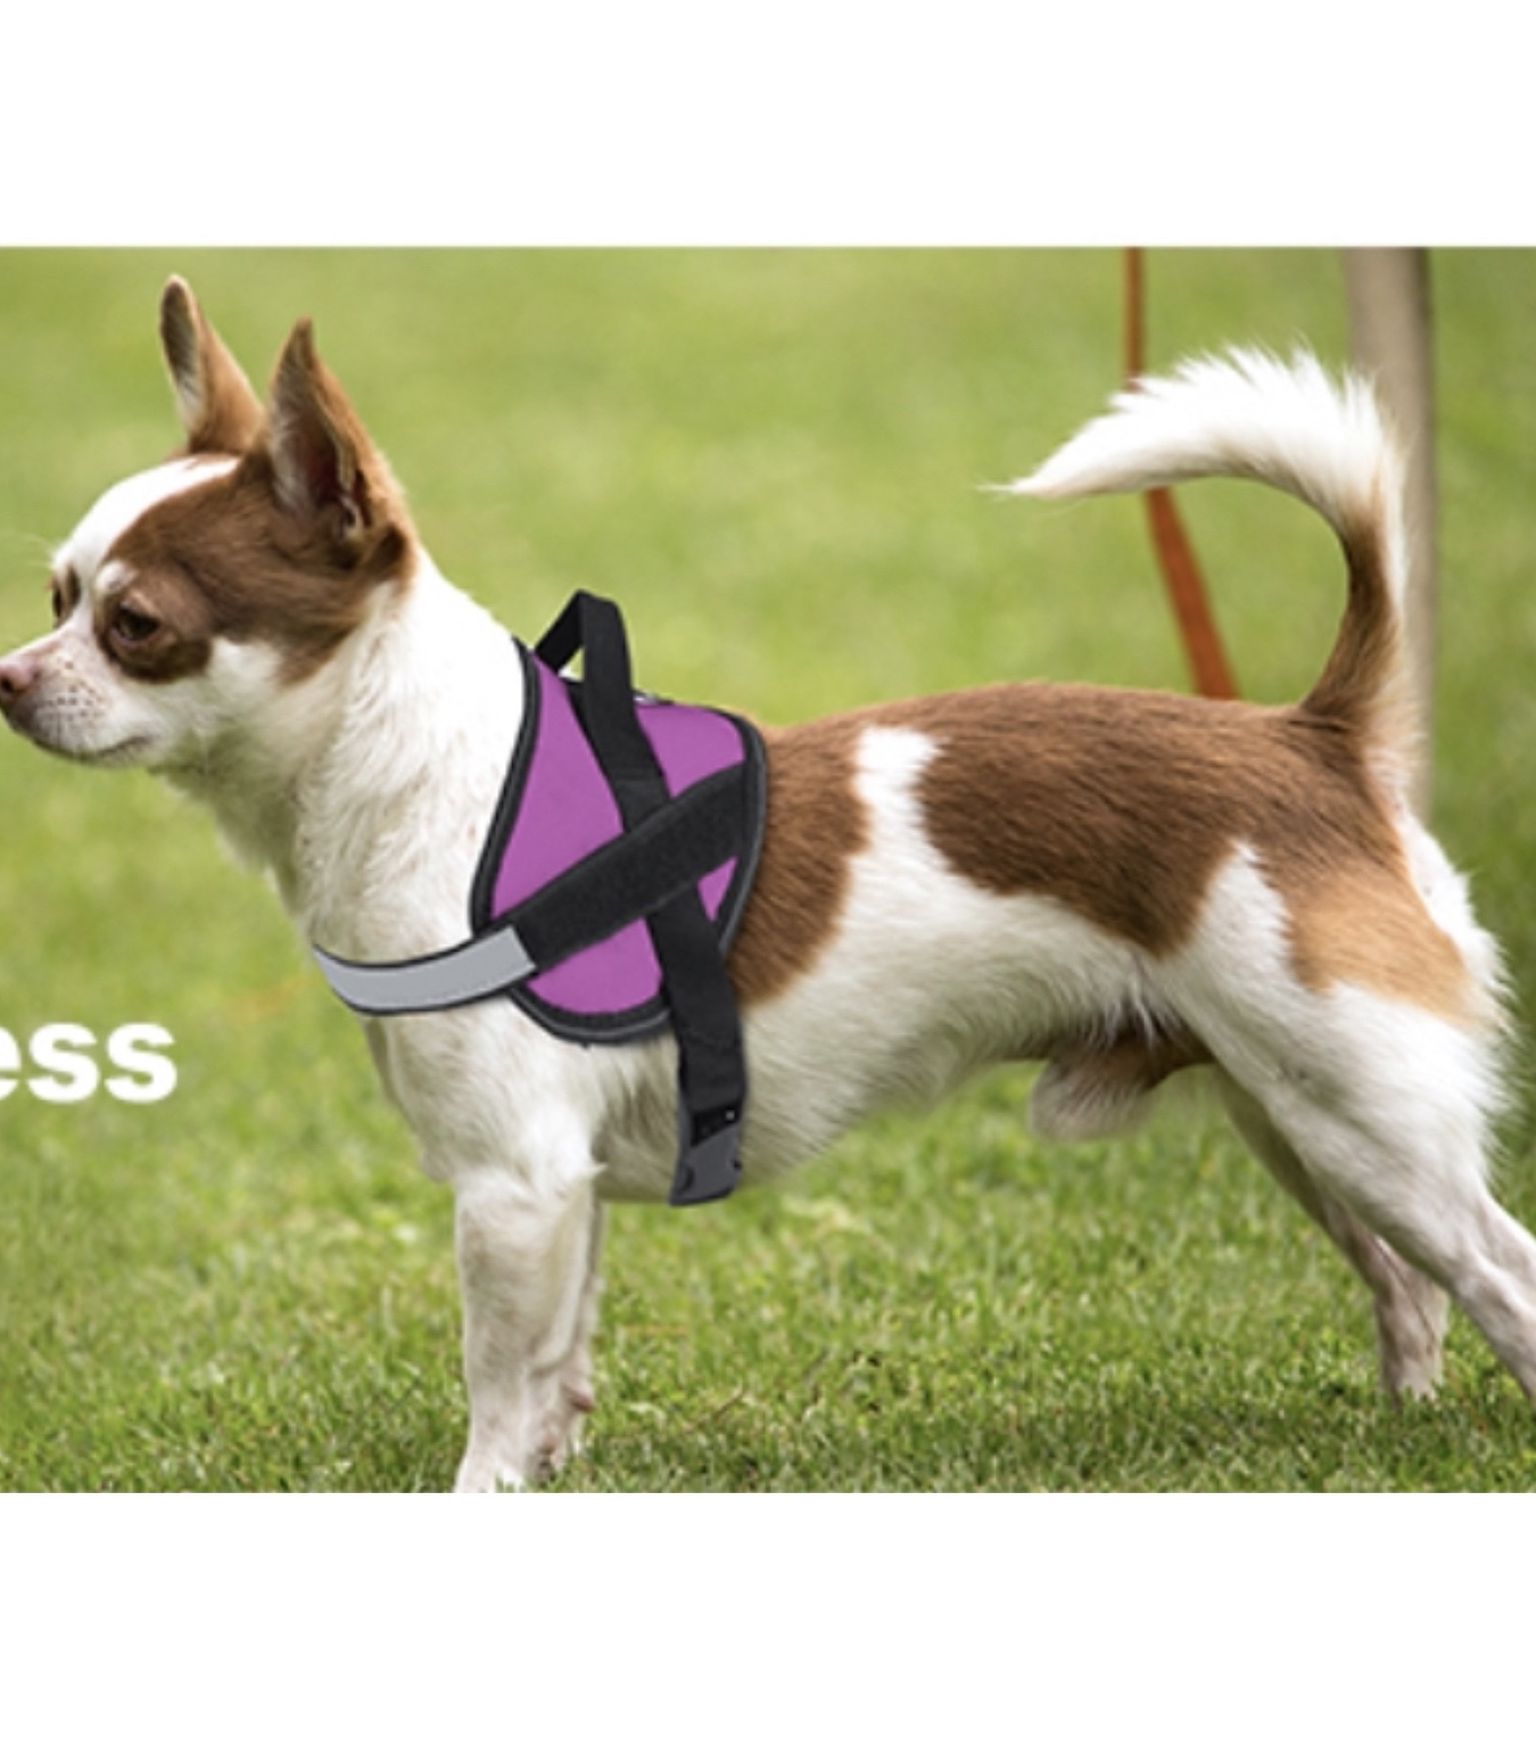 Dog Harness for Small Dogs No Pull No Choke,Reflective Adjustable Straps